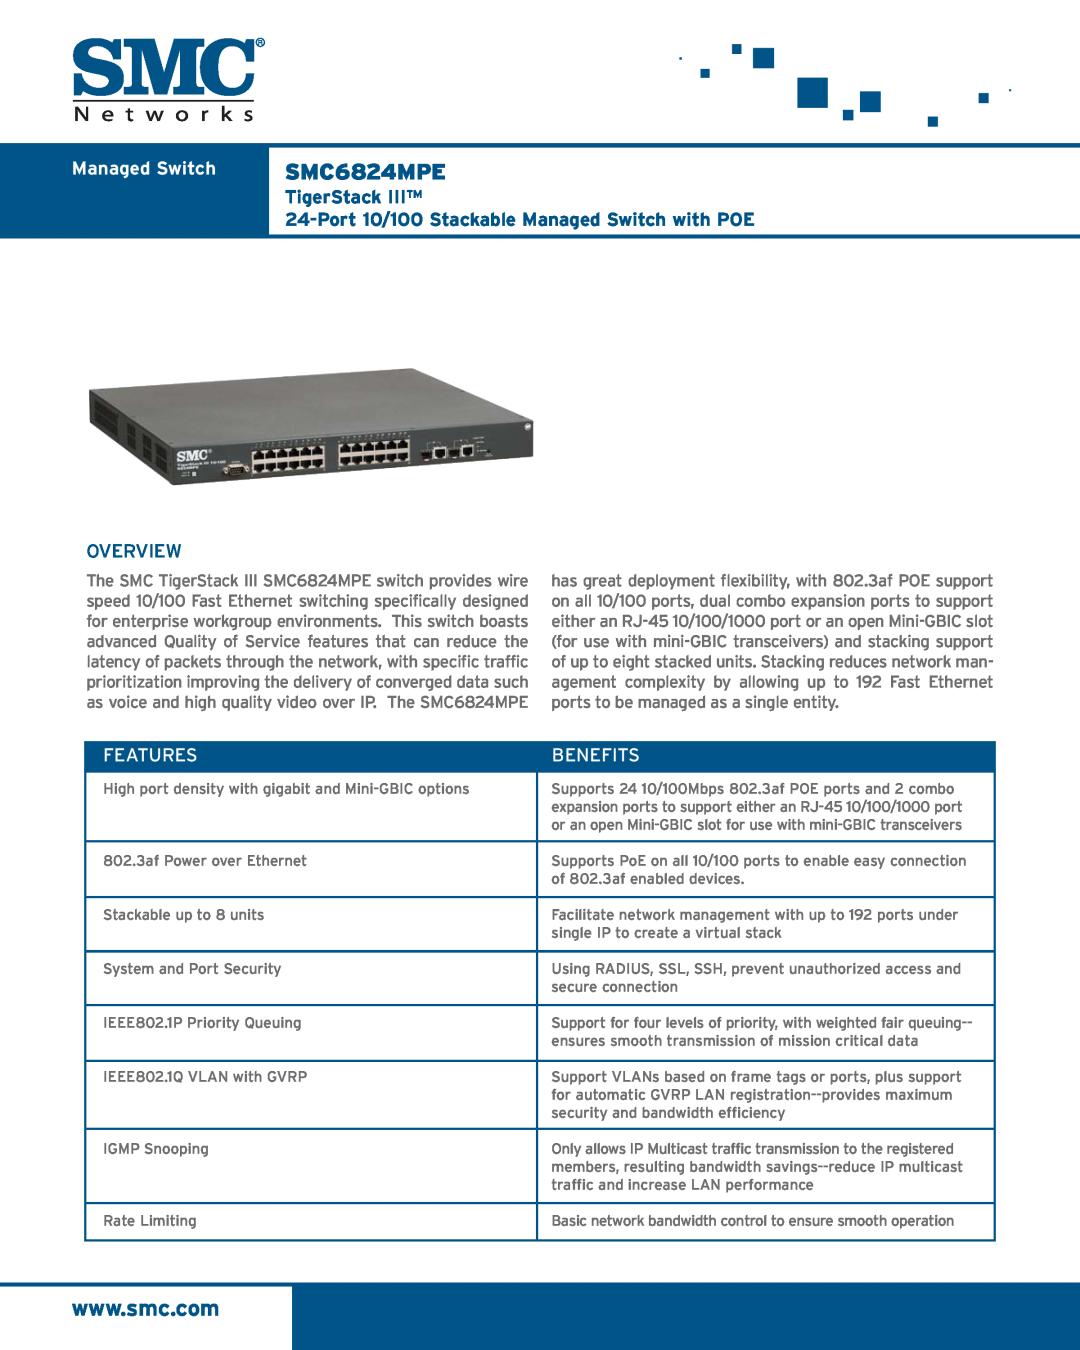 SMC Networks SMC6824MPE manual TigerStack, Port 10/100 Stackable Managed Switch with POE, Overview, Features, Benefits 